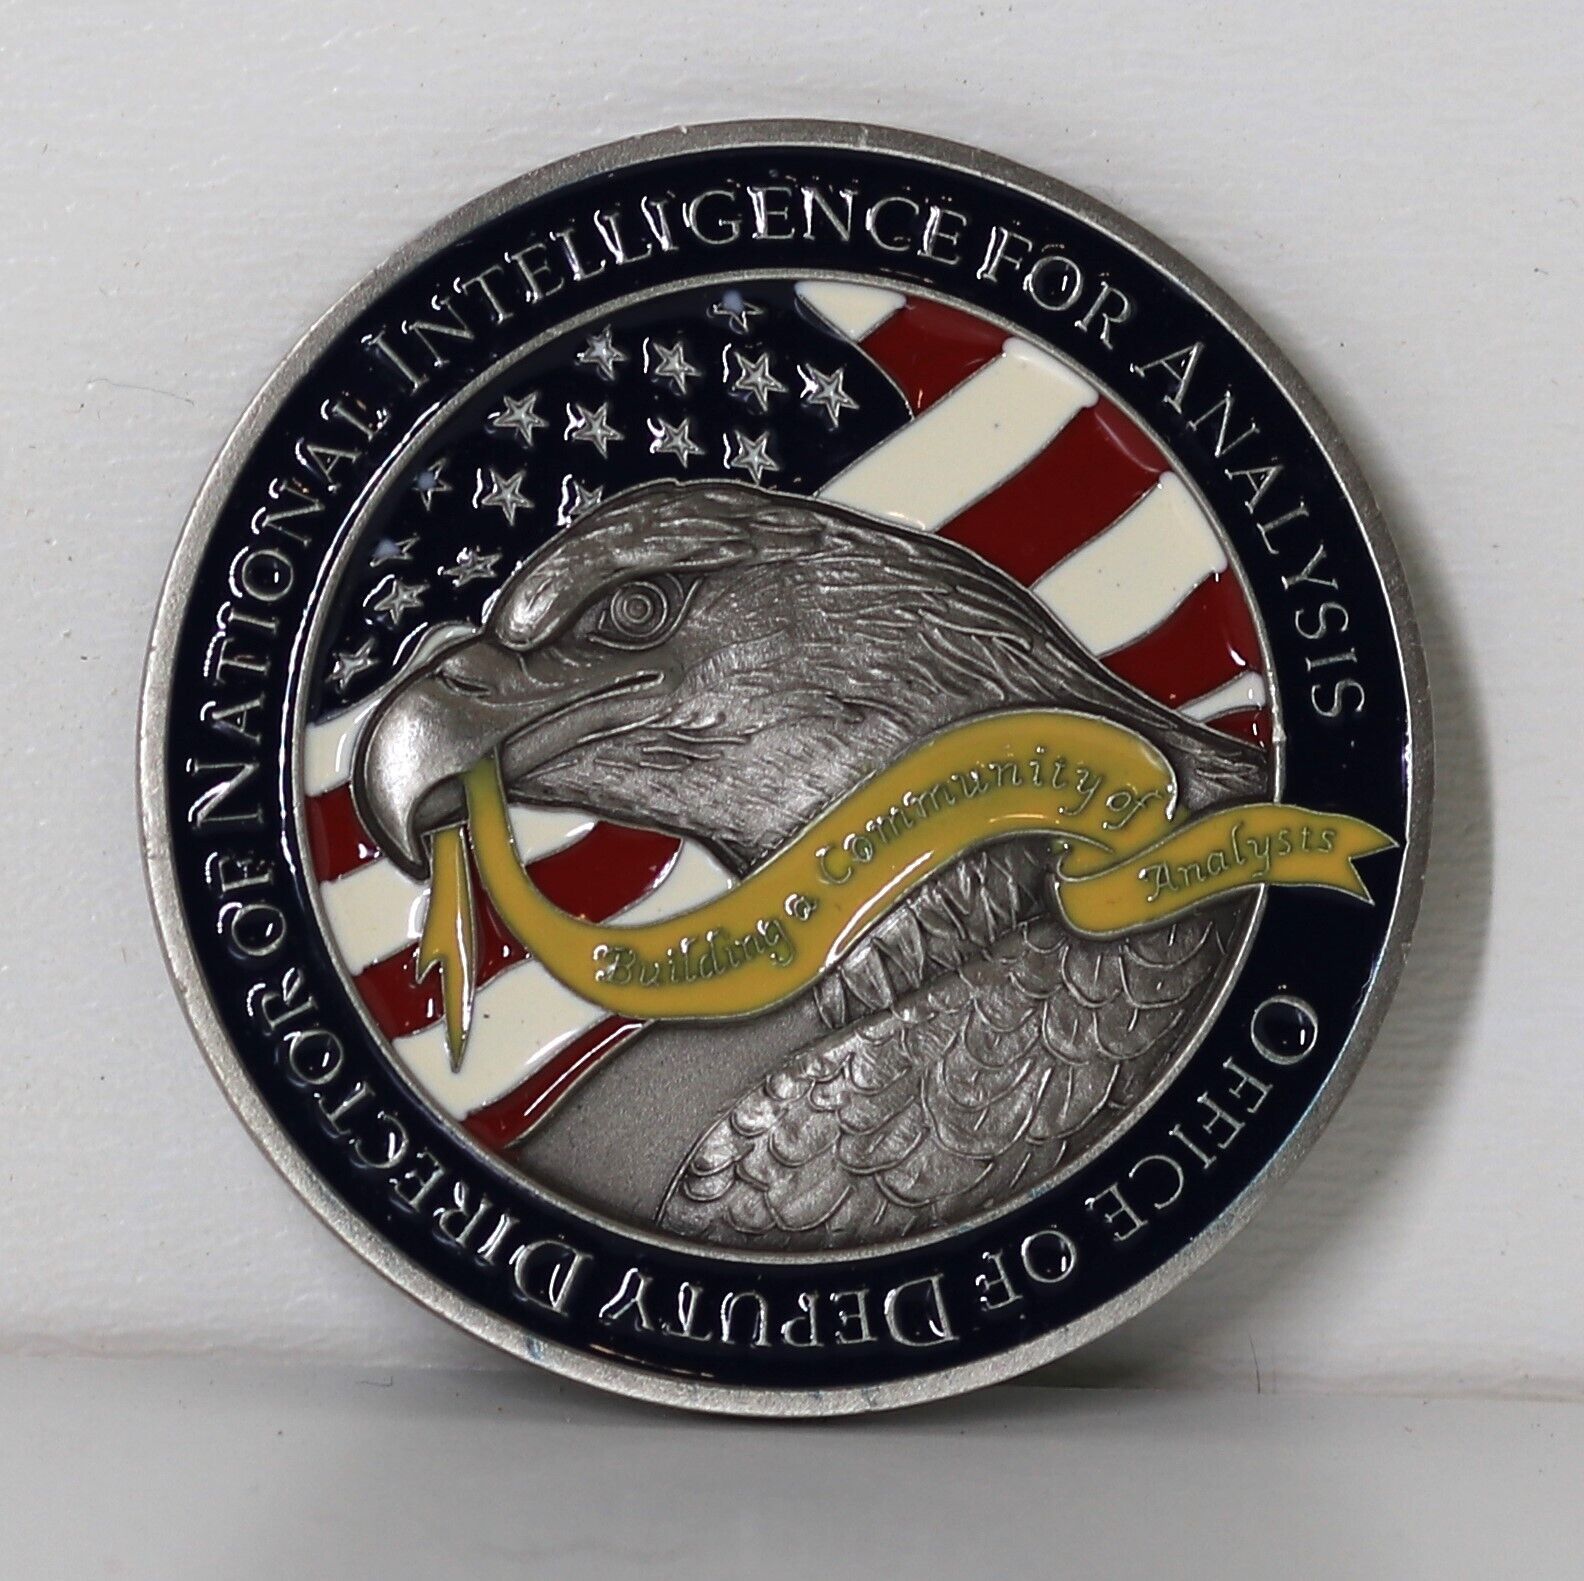 ODNI Office of the Director of National Intelligence Community of Analysts Coin